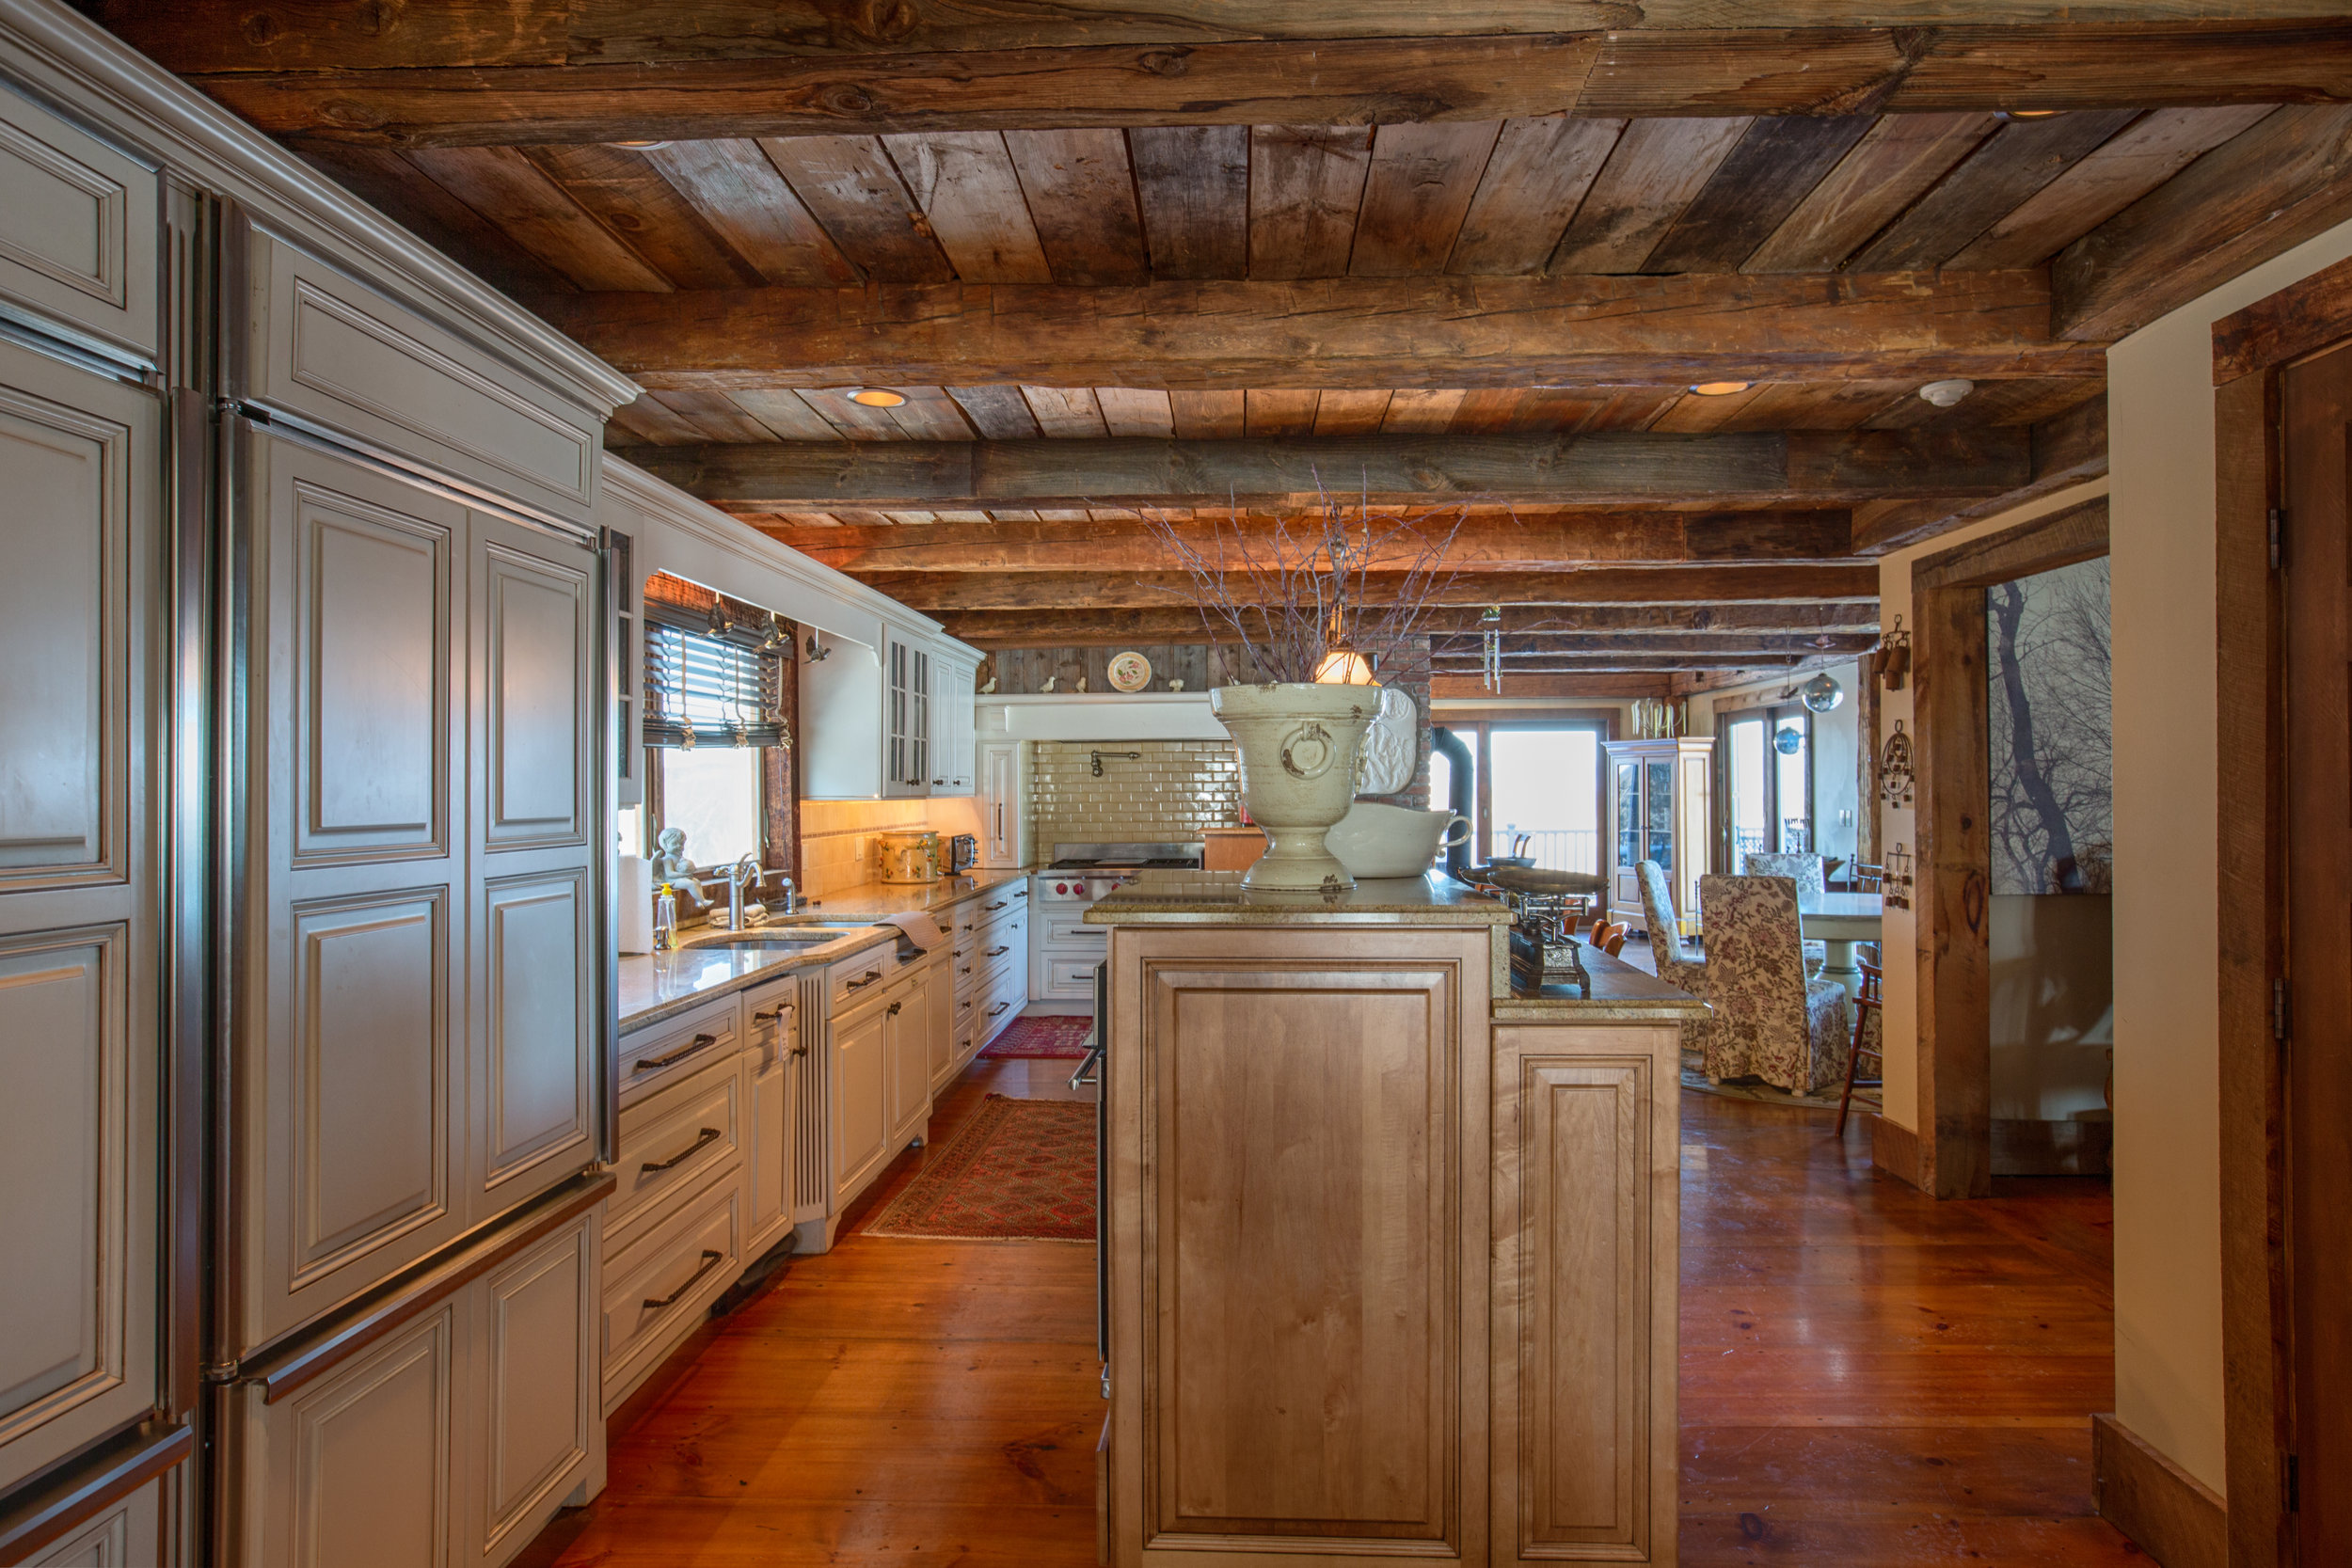  View from side of kitchen showing the over lay refrigerator.  Exposed wood beam ceilings.   